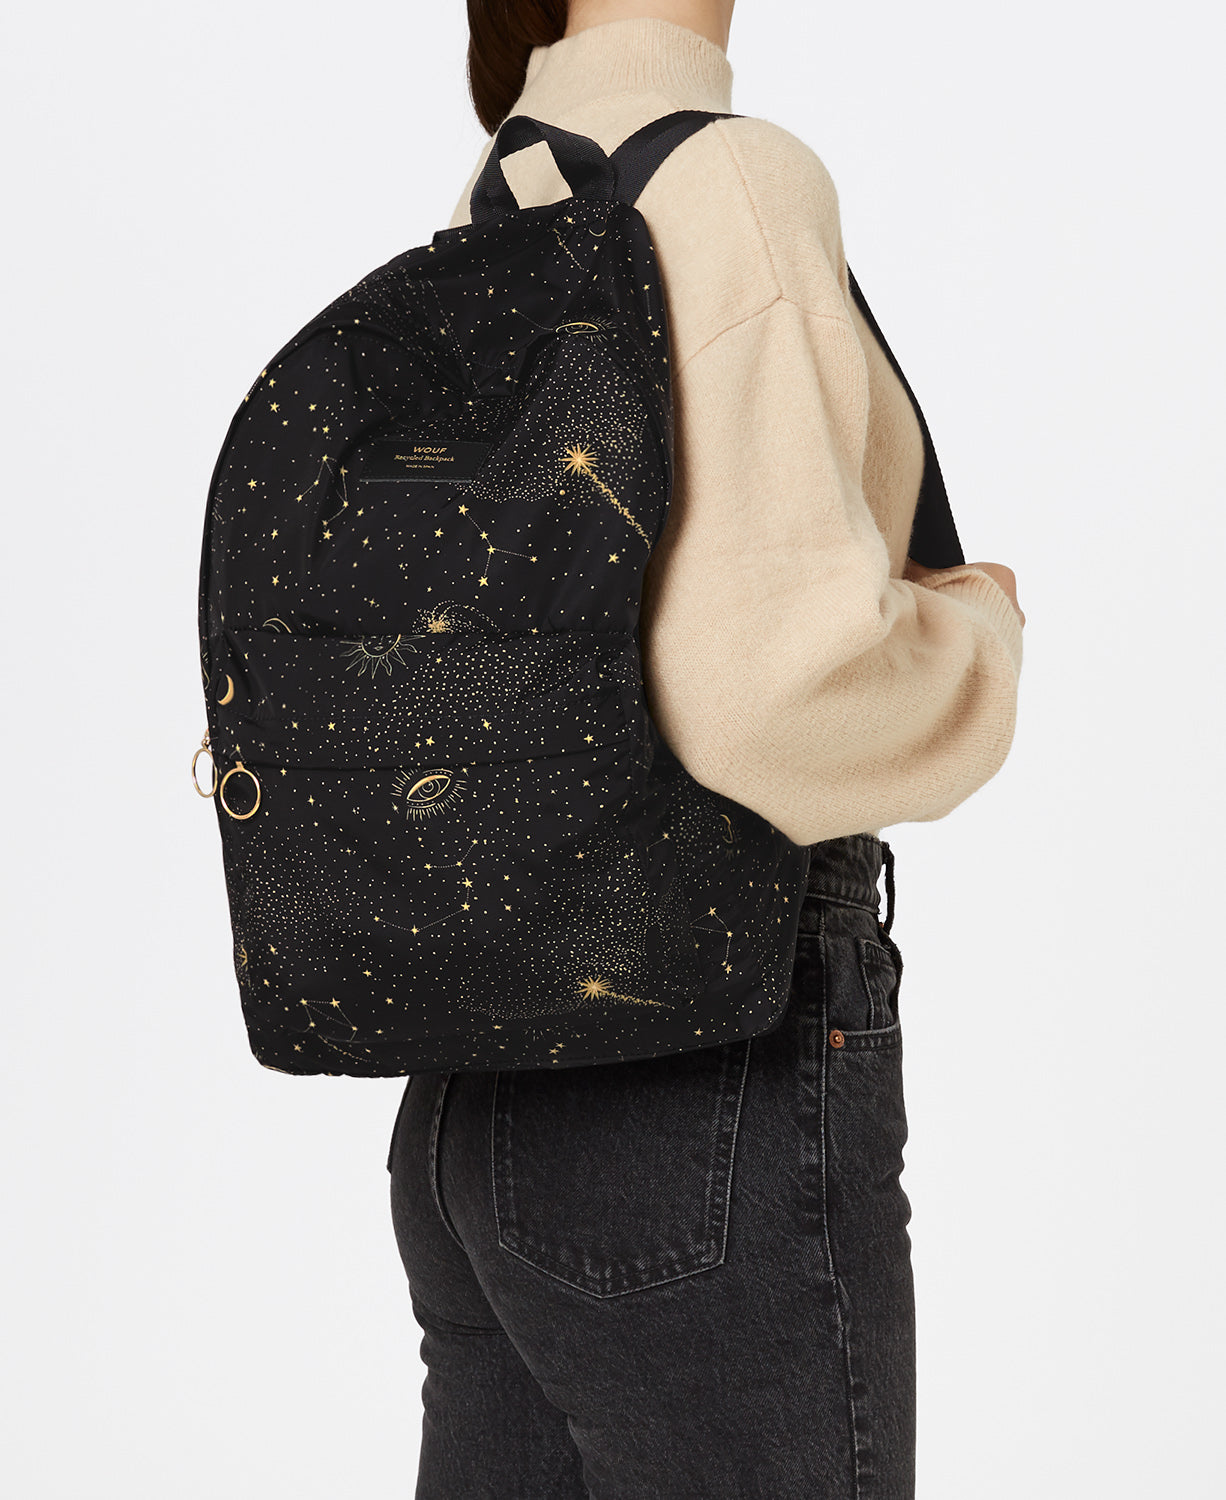 Recycled Backpack - Galaxy